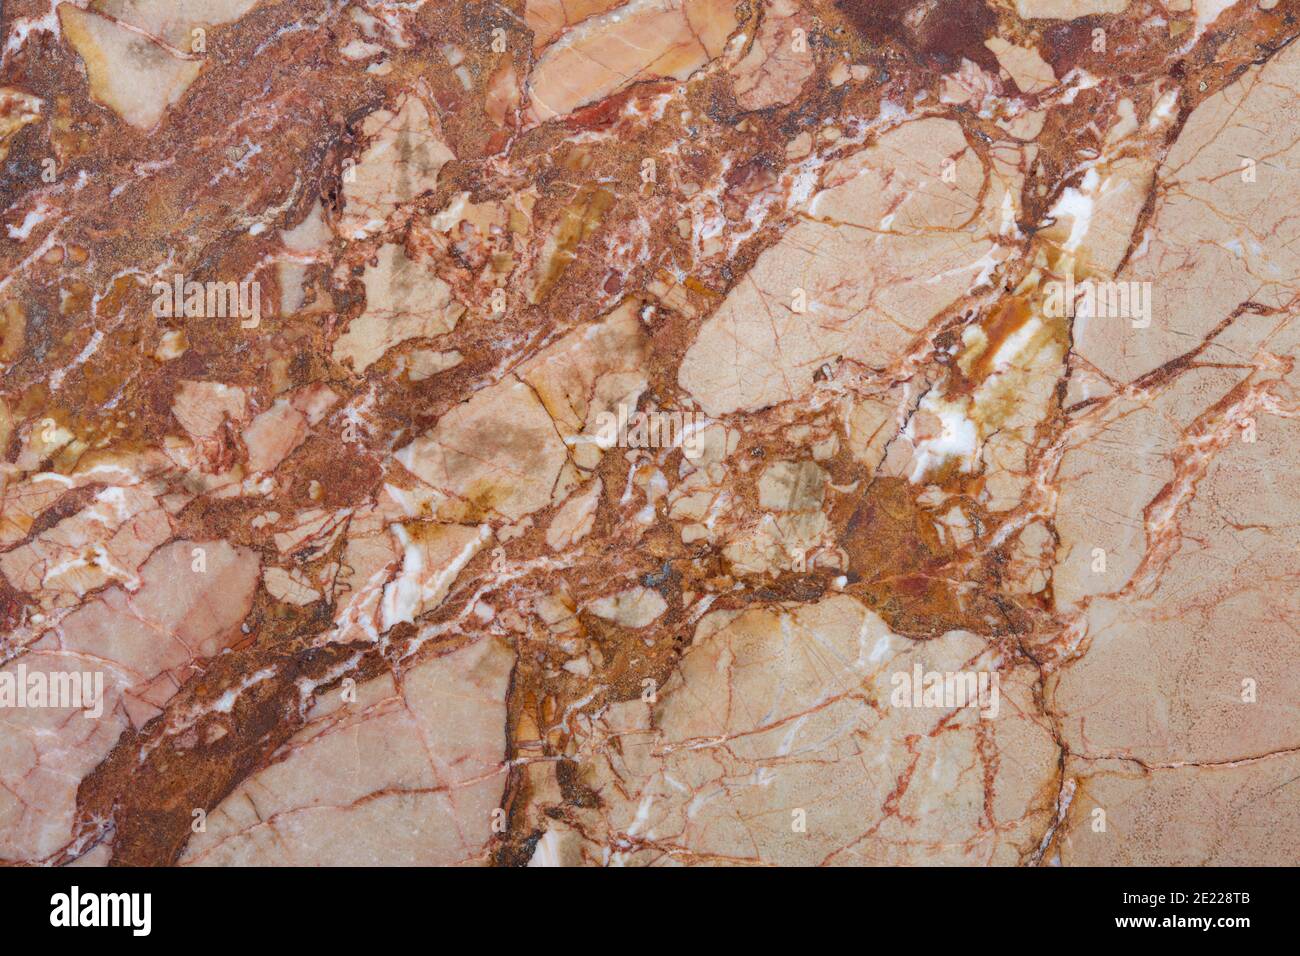 https://c8.alamy.com/comp/2E228TB/natural-pink-brown-marble-texture-background-2E228TB.jpg